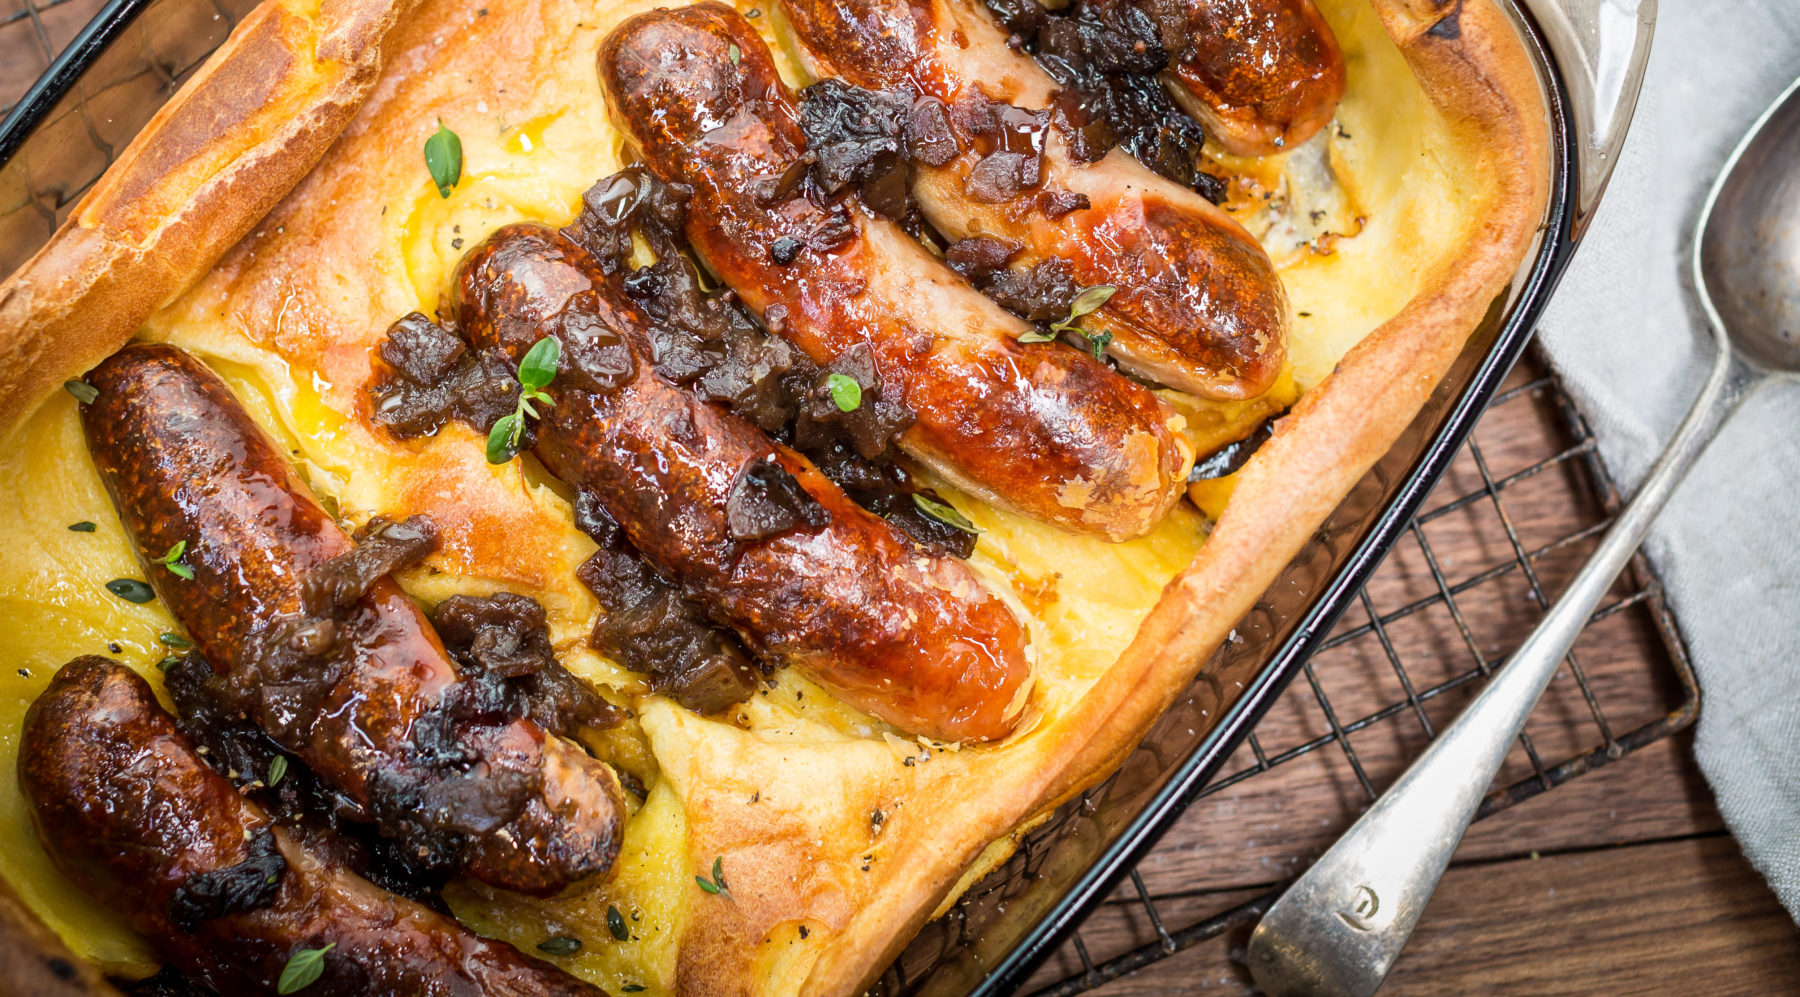 four Baked sausages in yellow bread.